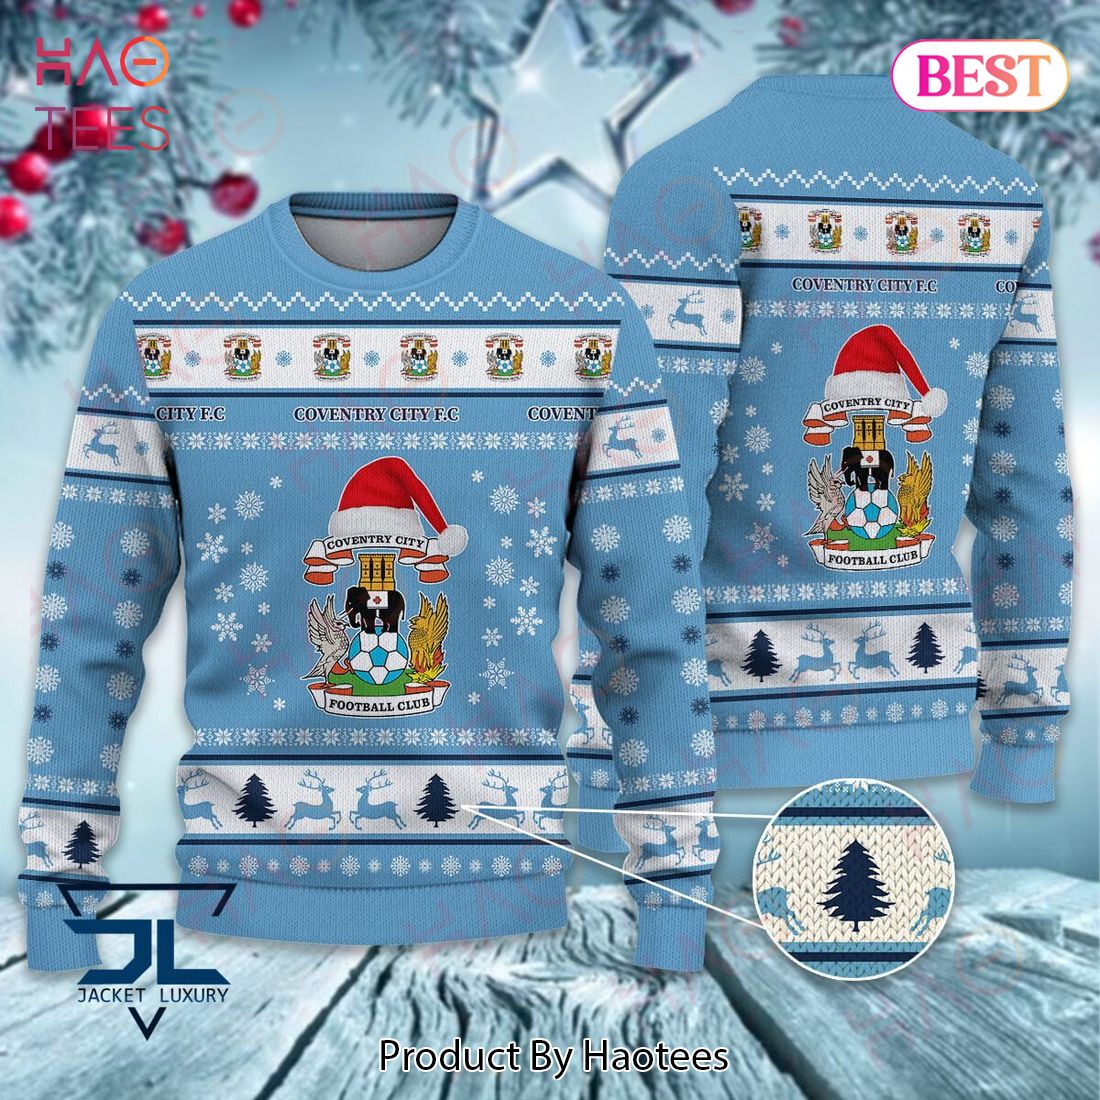 HOT Coventry City F.C Blue Mix White Christmas Luxury Brand Sweater Limited Edition